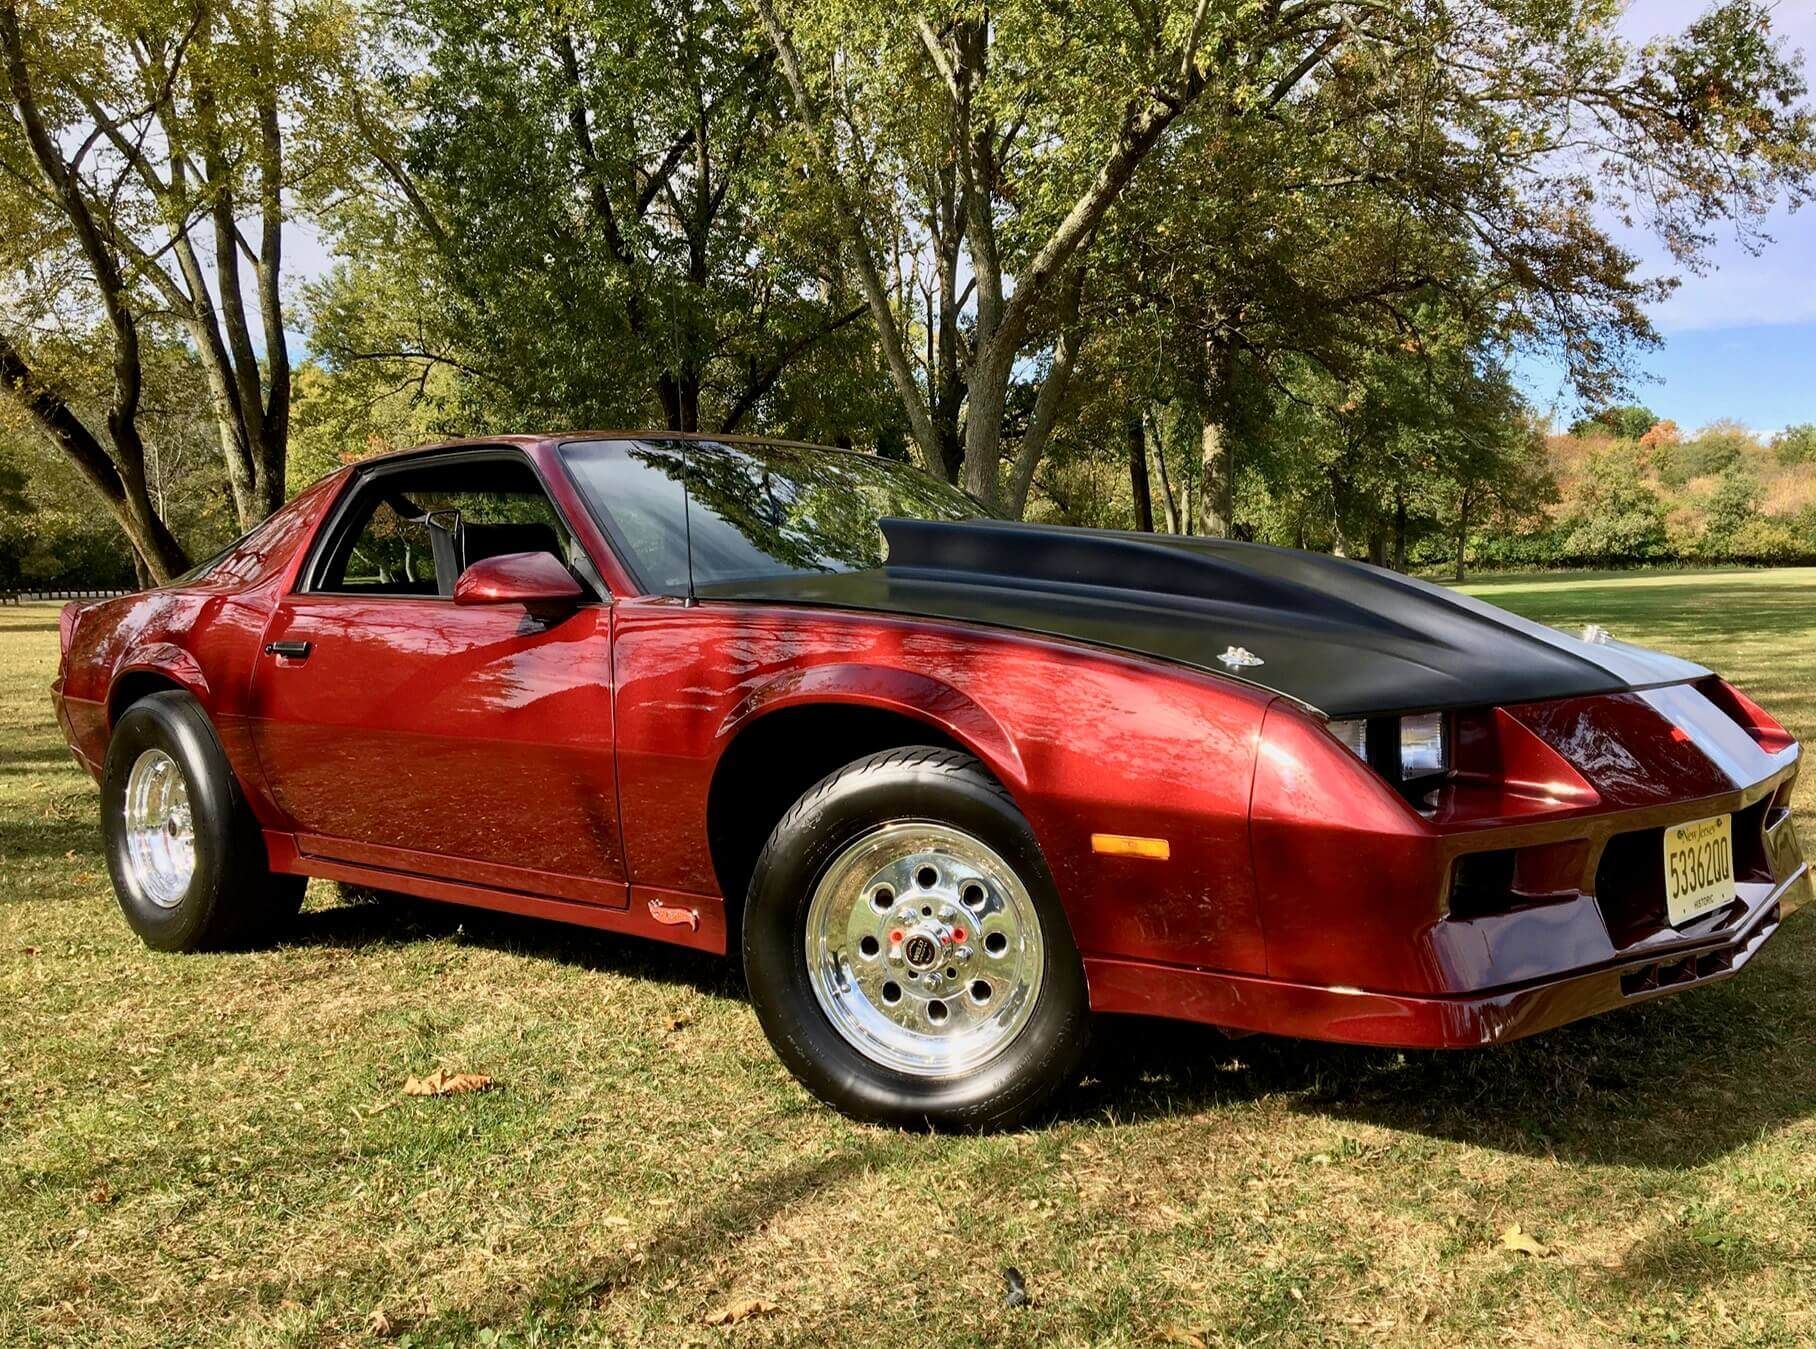 1984 Chevrolet Camaro: The iconic muscle car.